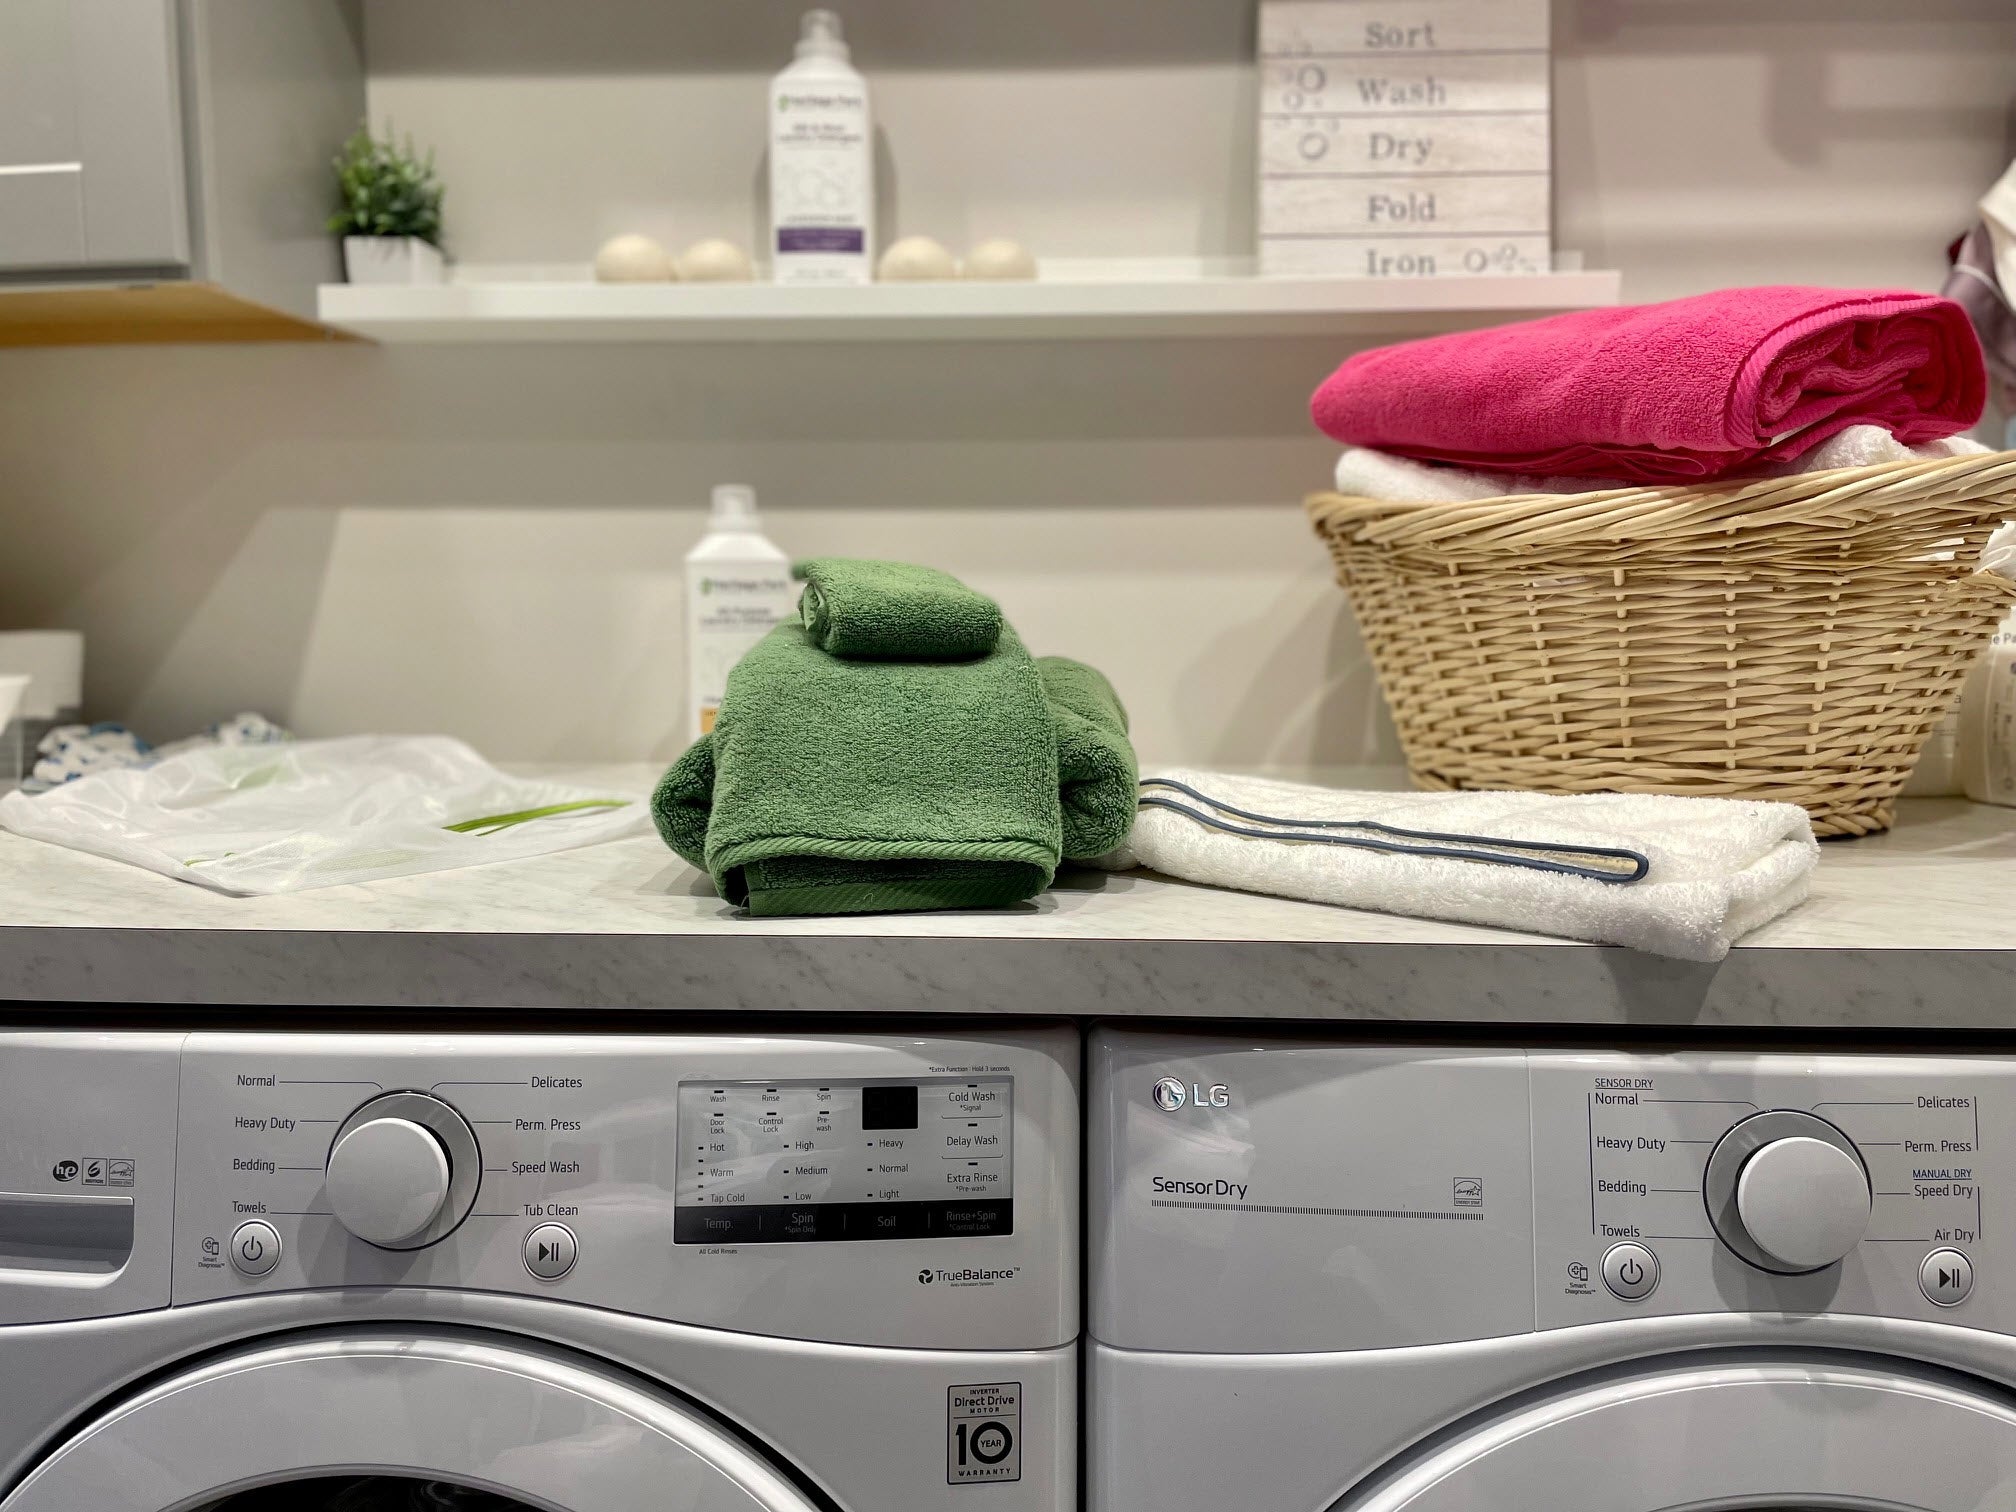 How to Care for Matouk Towels